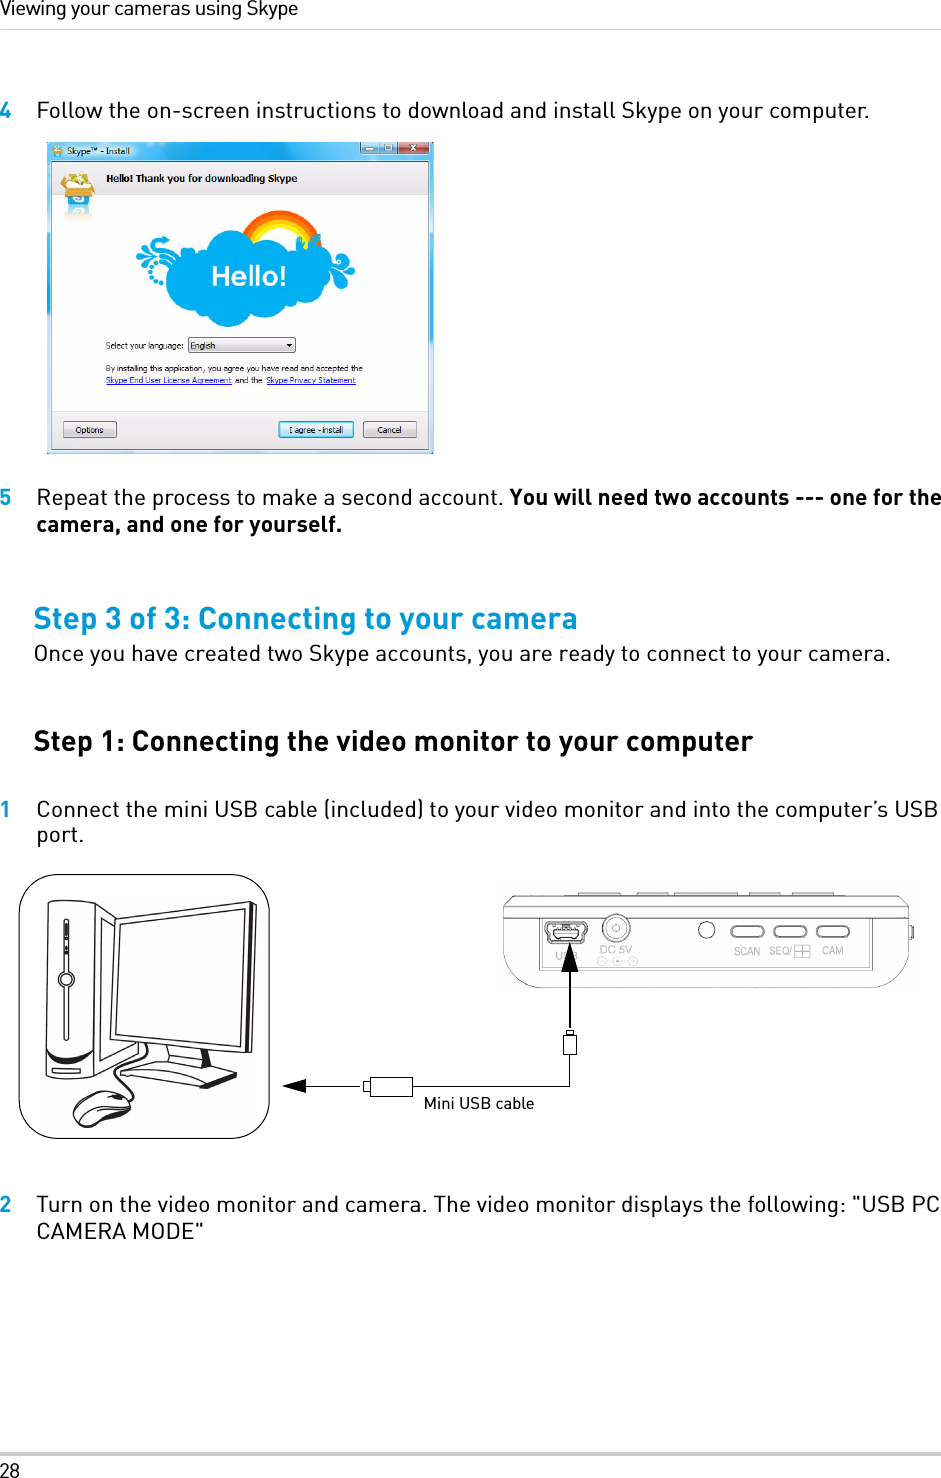 28Viewing your cameras using Skype4Follow the on-screen instructions to download and install Skype on your computer.5Repeat the process to make a second account. You will need two accounts --- one for the camera, and one for yourself.Step 3 of 3: Connecting to your cameraOnce you have created two Skype accounts, you are ready to connect to your camera. Step 1: Connecting the video monitor to your computer1Connect the mini USB cable (included) to your video monitor and into the computer’s USB port. 2Turn on the video monitor and camera. The video monitor displays the following: &quot;USB PC CAMERA MODE&quot;Mini USB cable